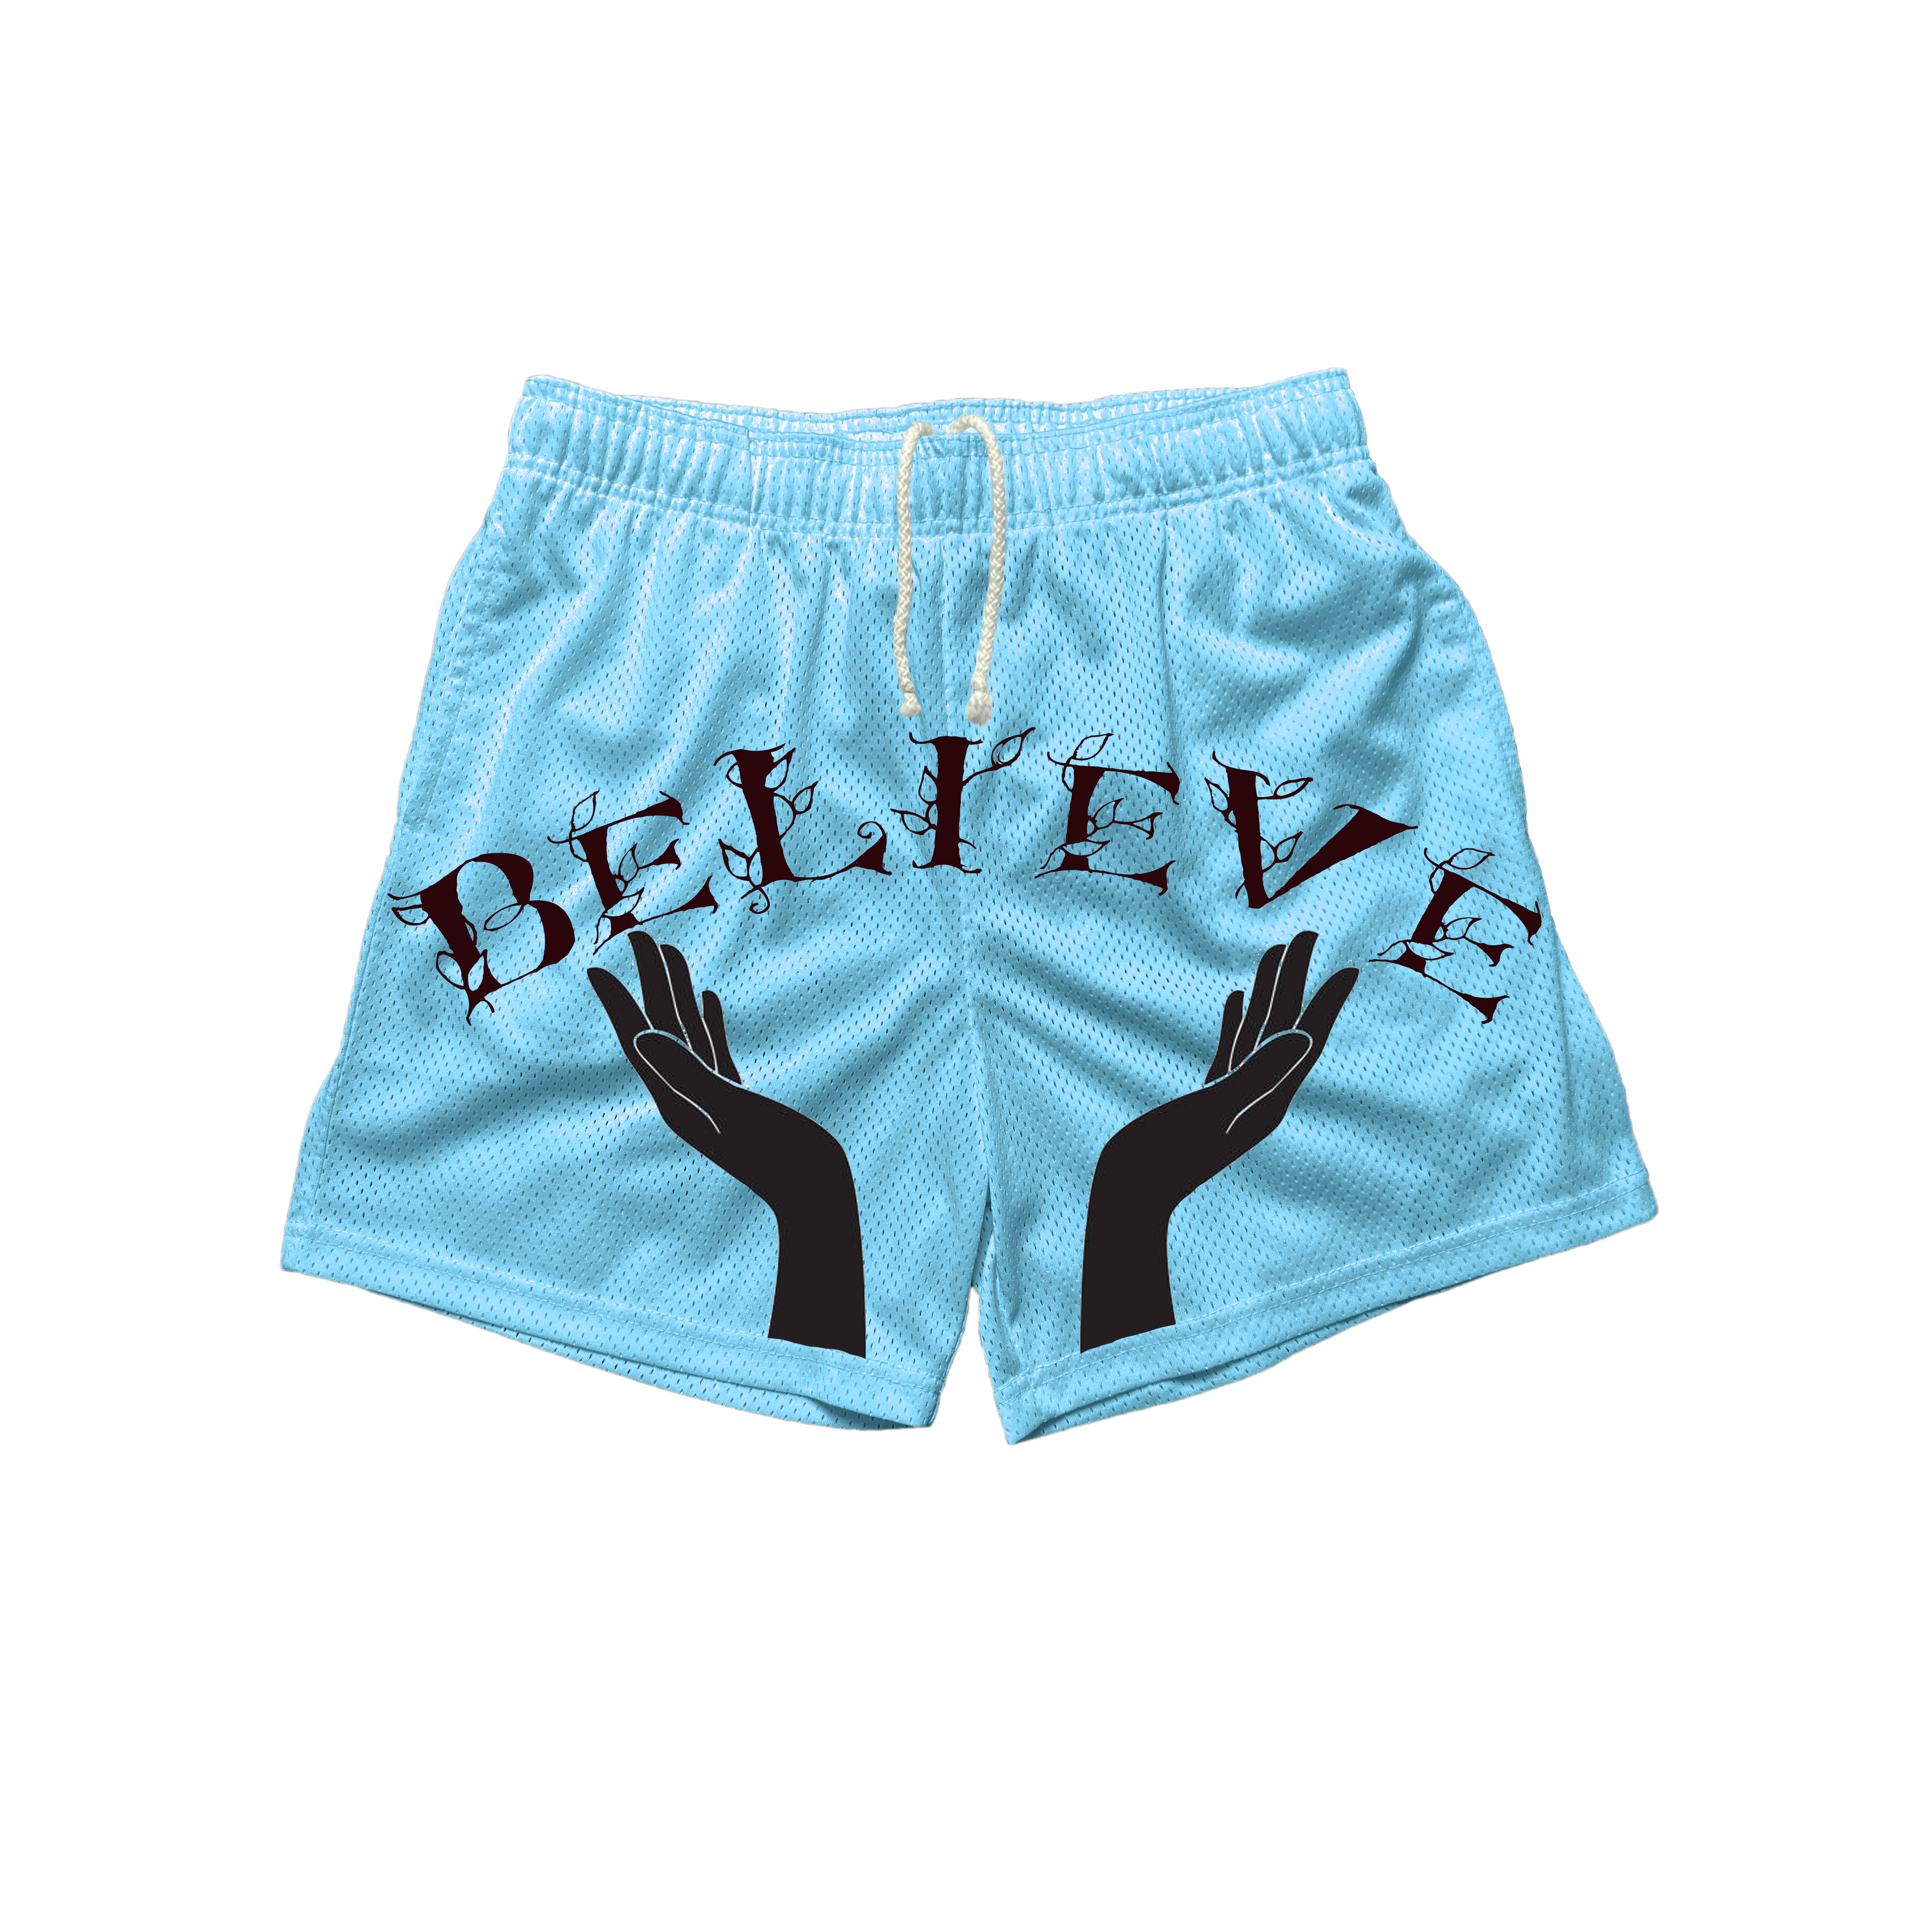 Cherry Blossom Believe athletic shorts